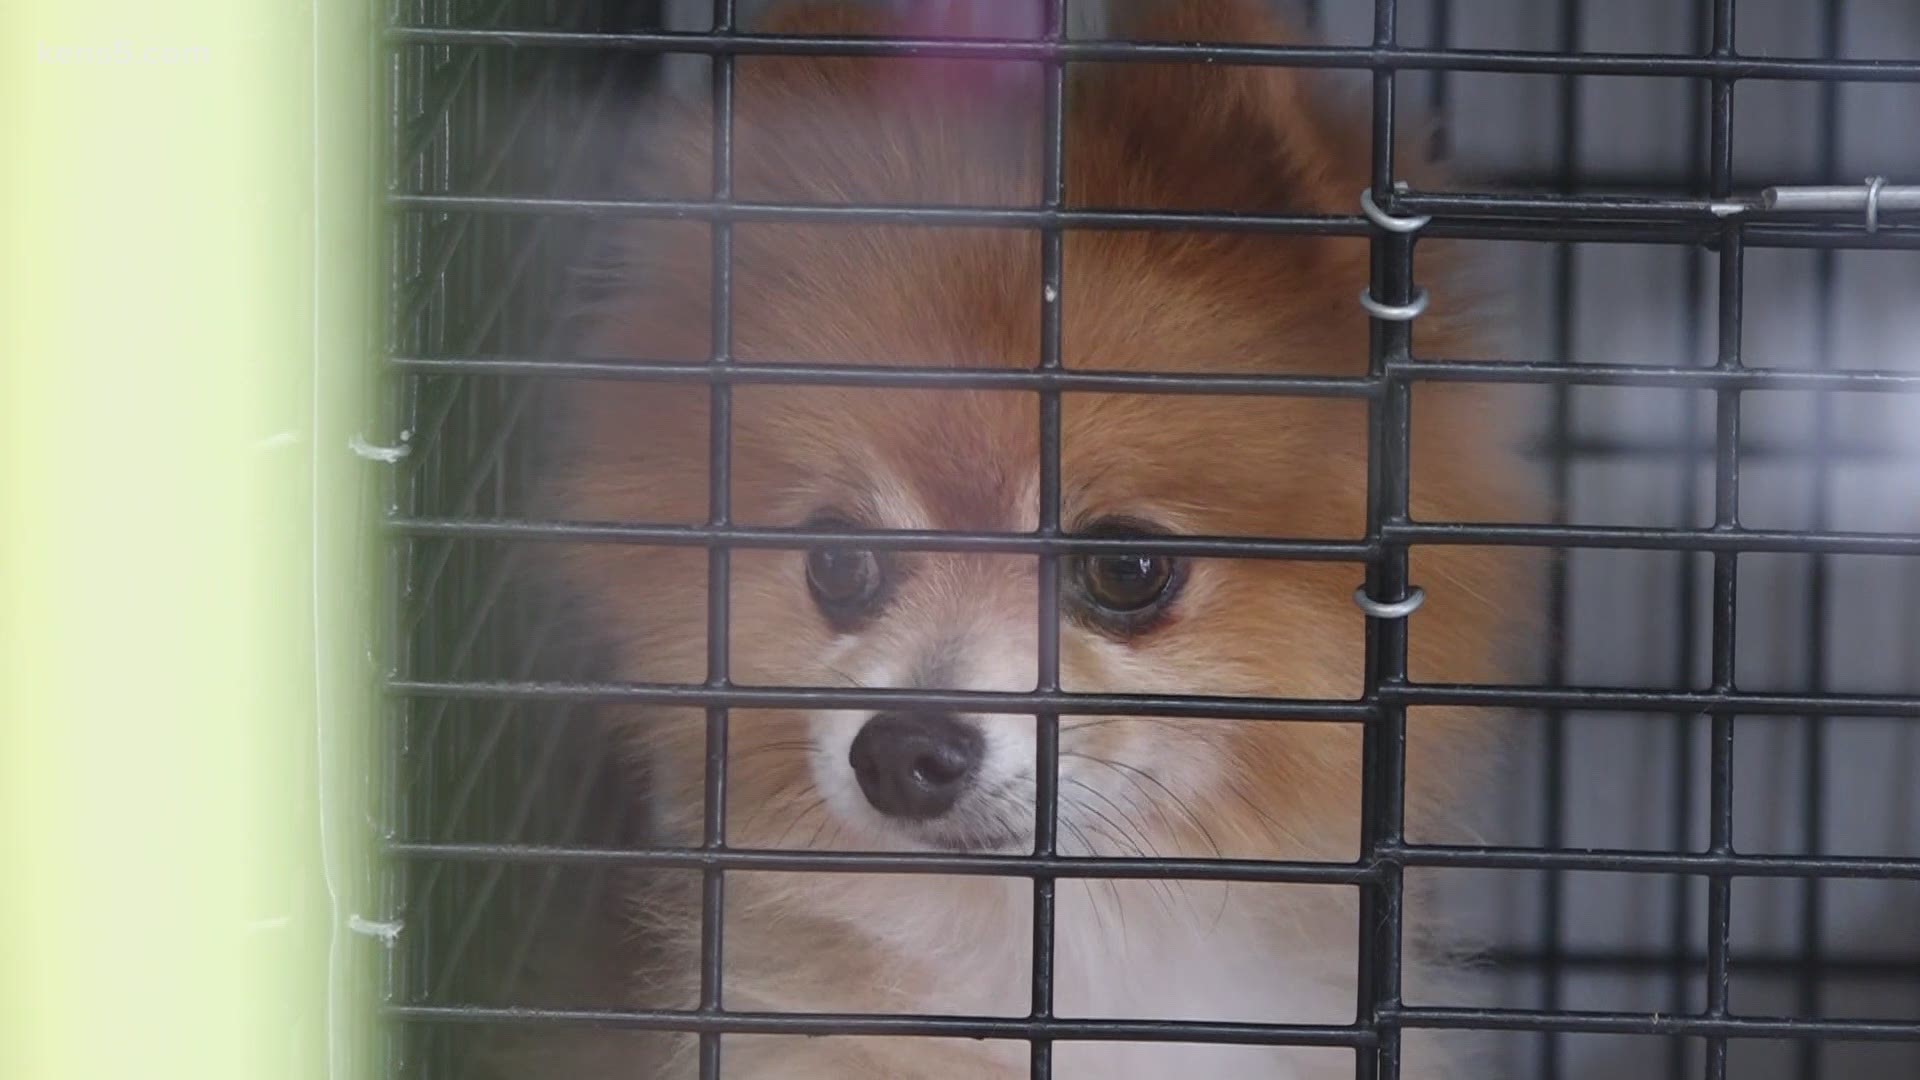 Pet stores in San Antonio could soon be banned from selling animals from breeders.